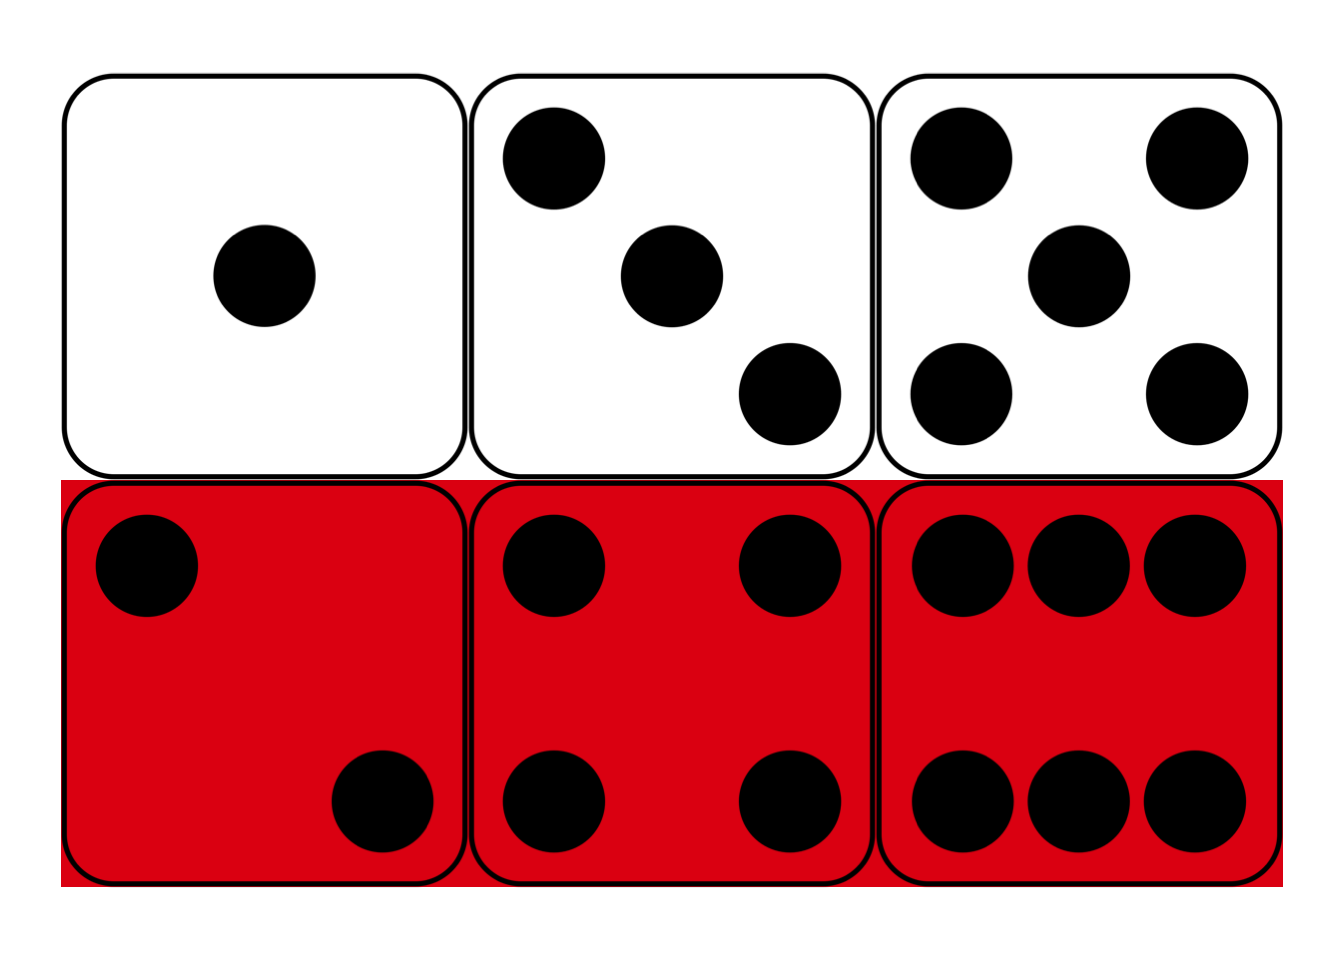 Conditional probability in a fair die roll